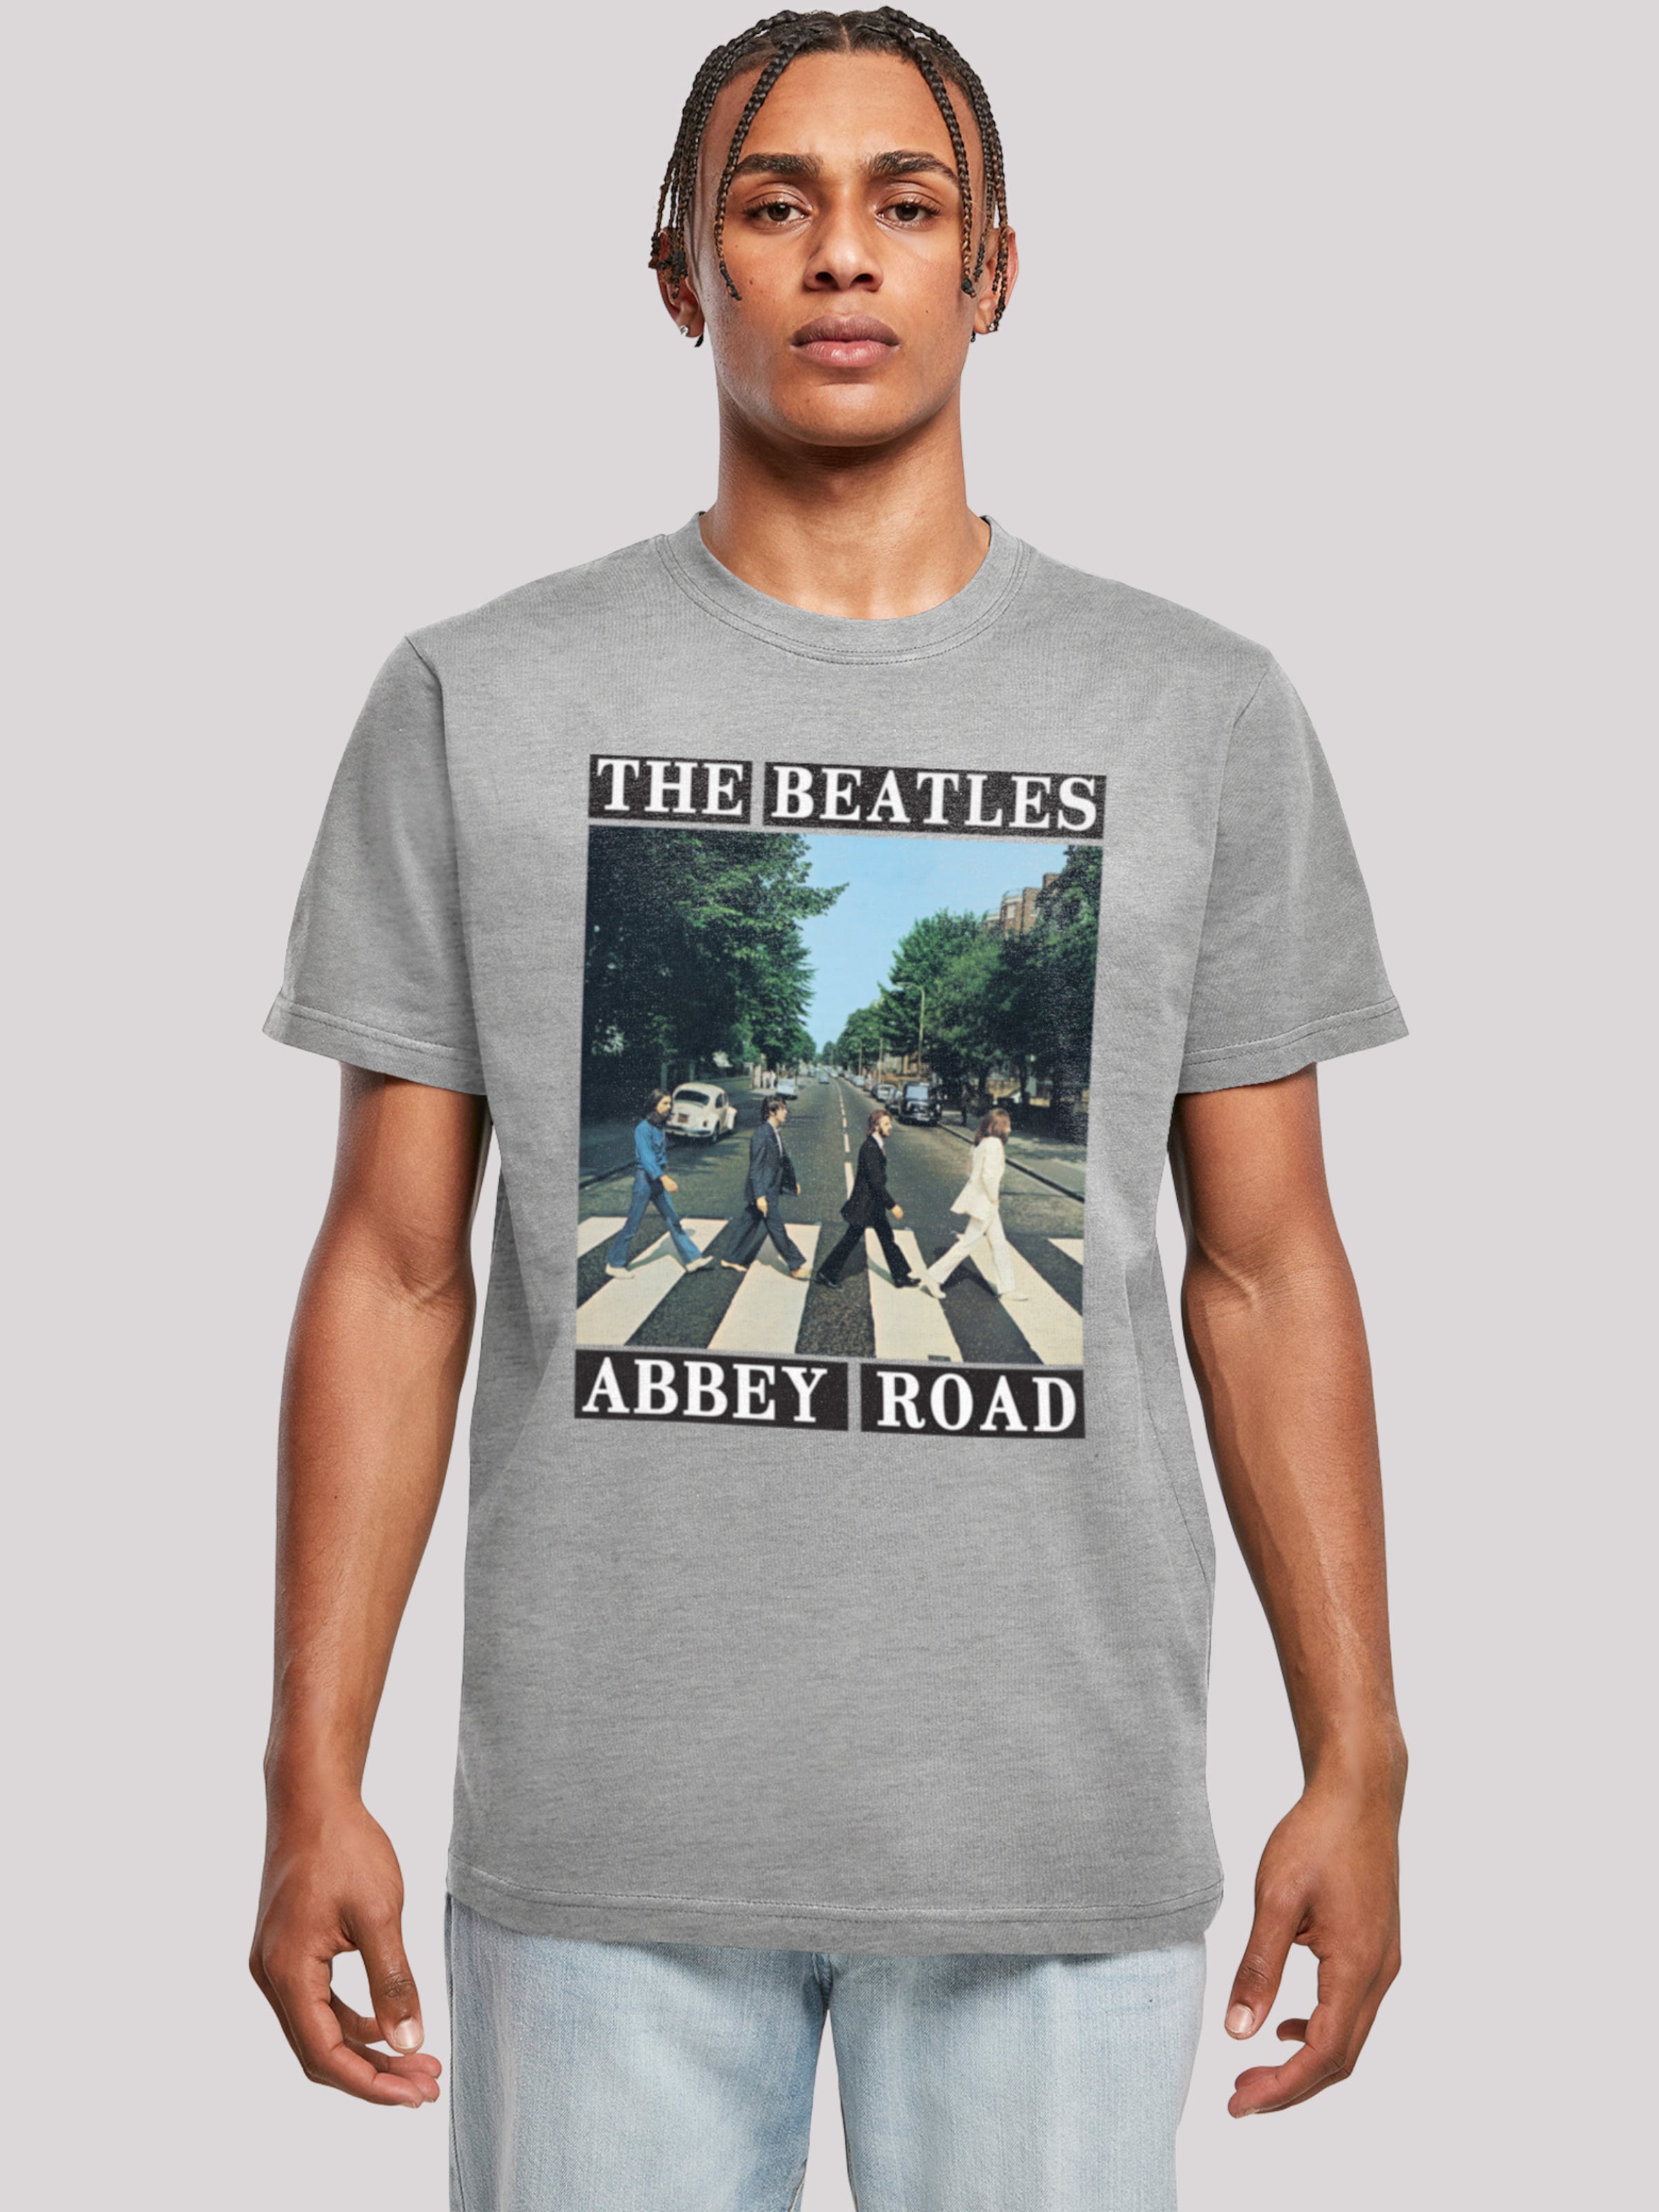 Abbey Road\' Beatles ABOUT | in Grau Band \'The F4NT4STIC Shirt YOU